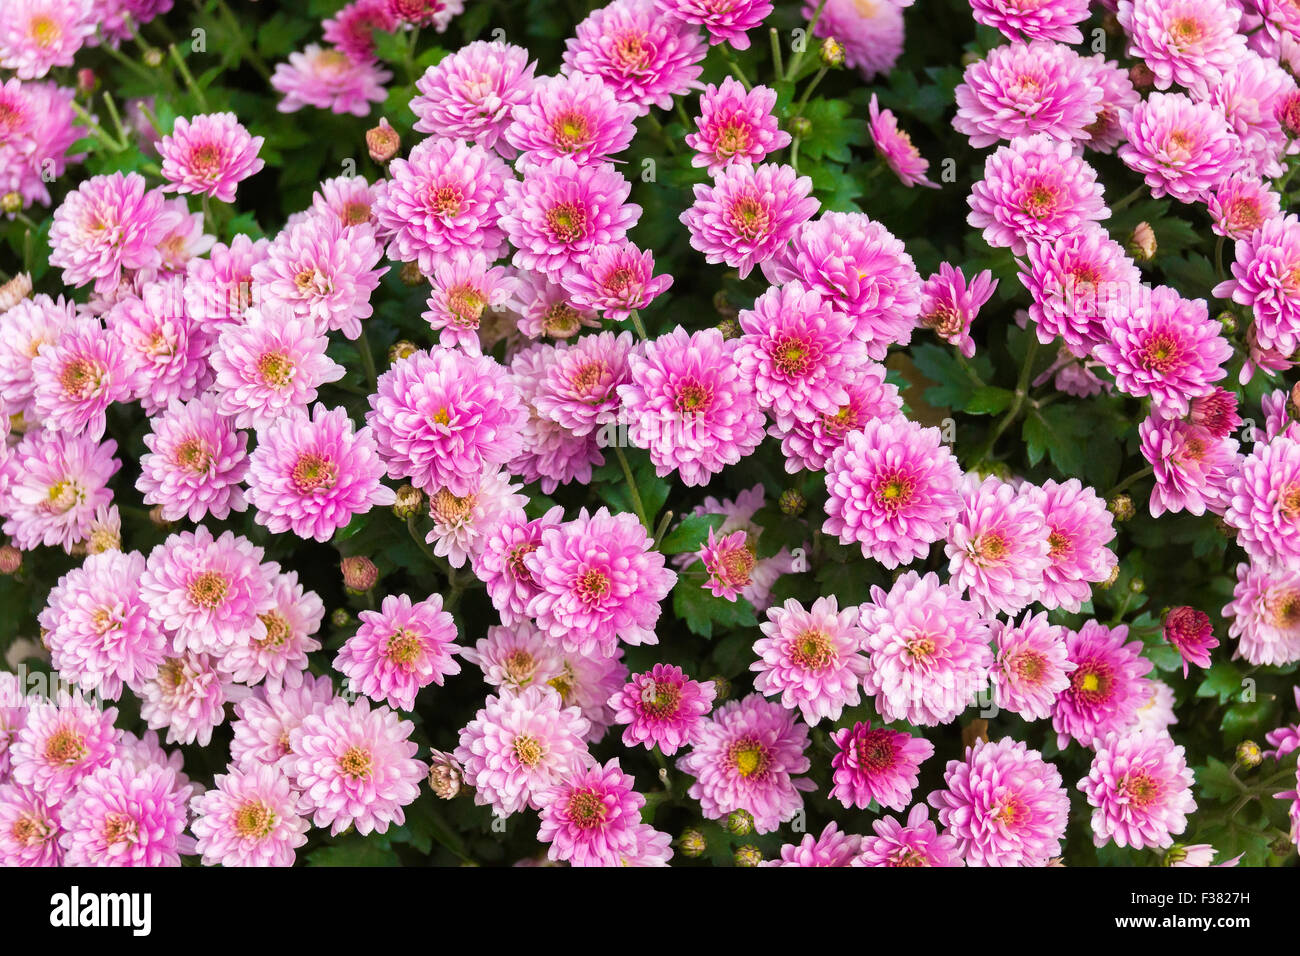 The photo shows flowers in the flowerbed Stock Photo